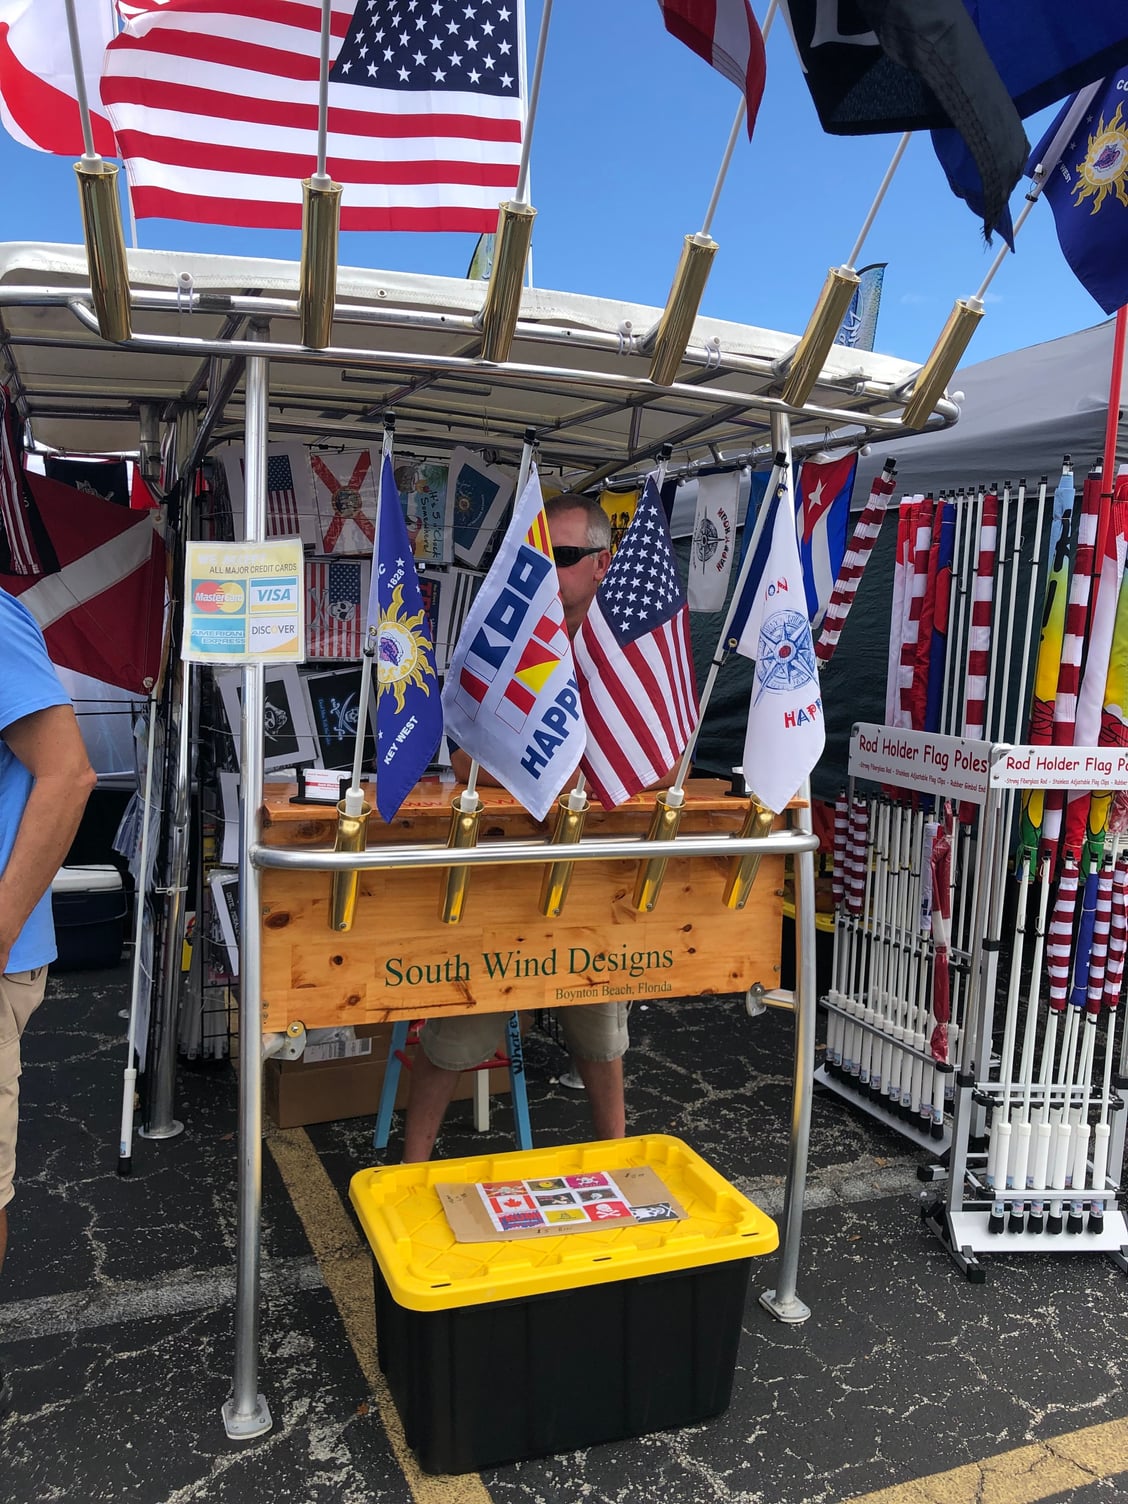 Big Sale on New Design Rod Holder Flagpoles - Fly your flags from any rod  holder - The Hull Truth - Boating and Fishing Forum